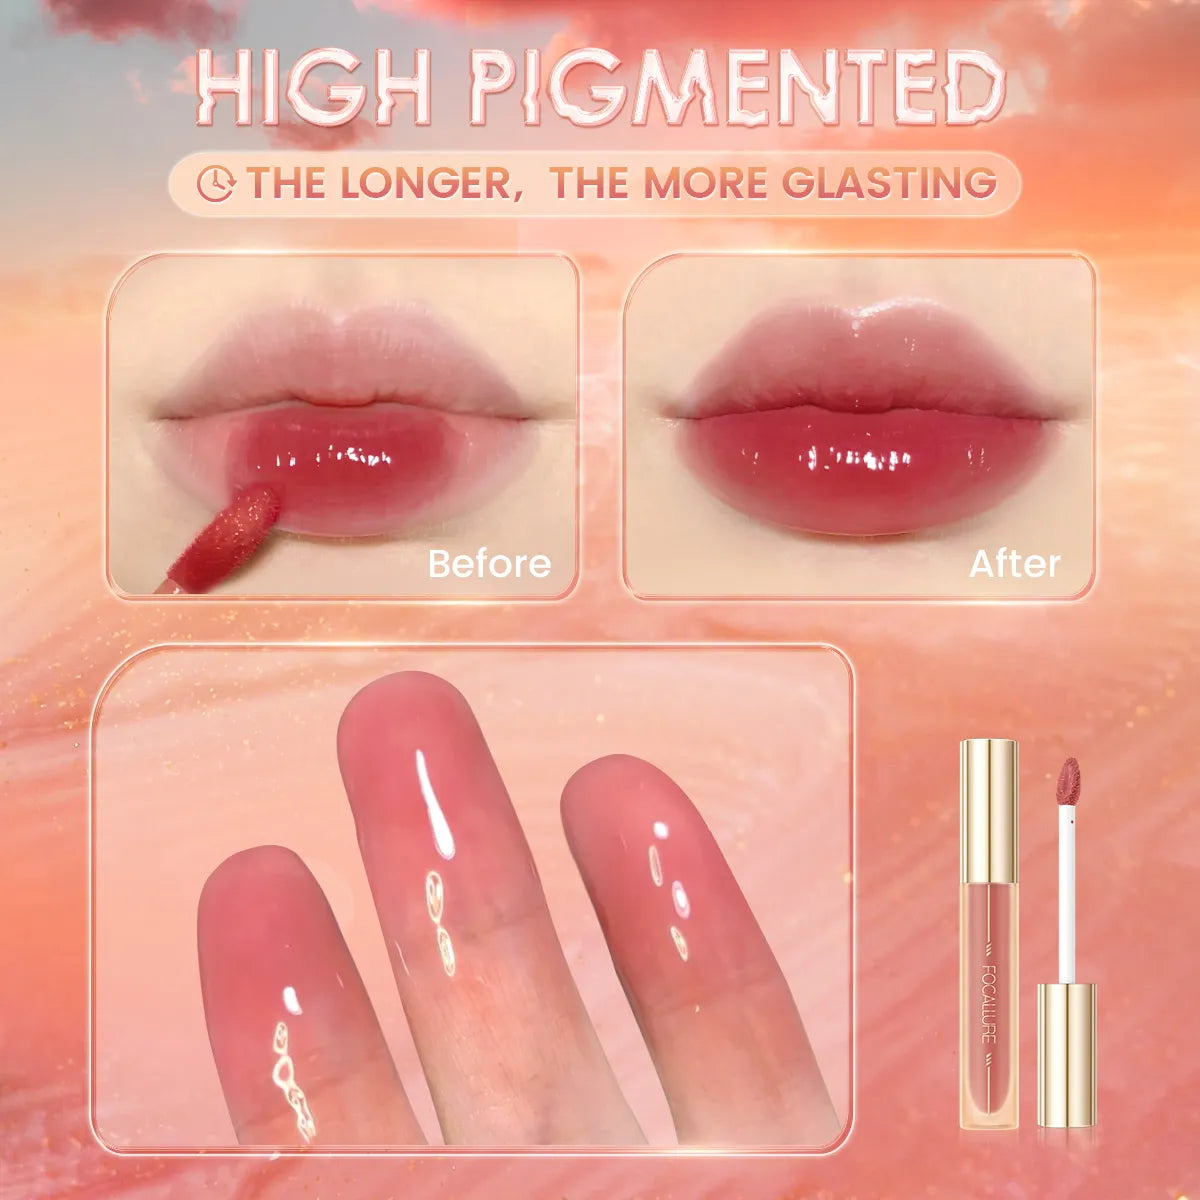 Focallure High Pigmented Glasting Lip Tint Dewy Effect